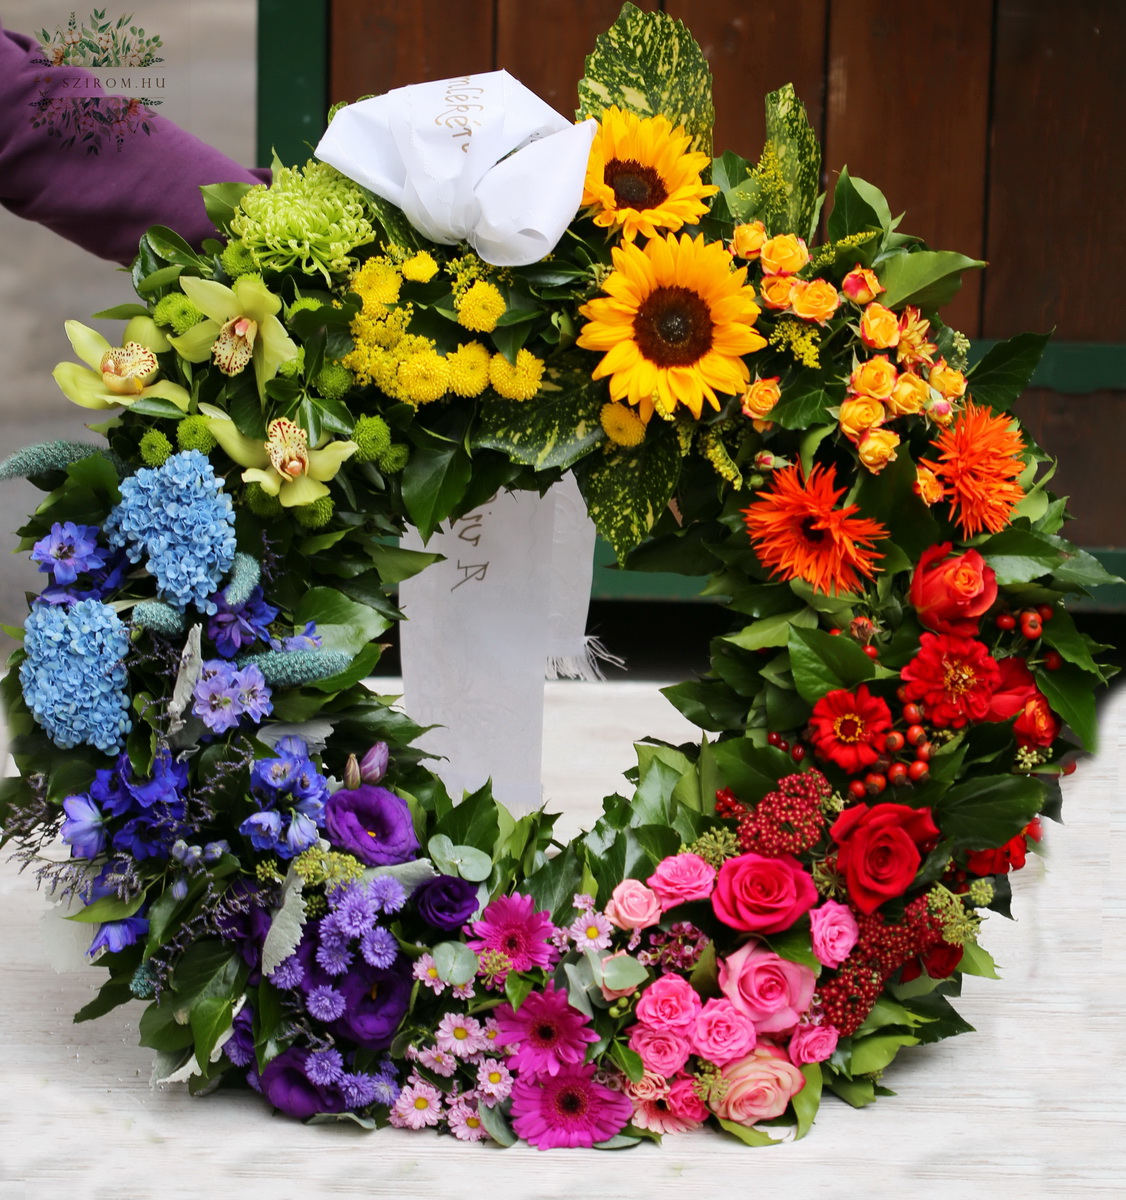 flower delivery Budapest - funeral wreath with flowers in rainbow colors (70cm)